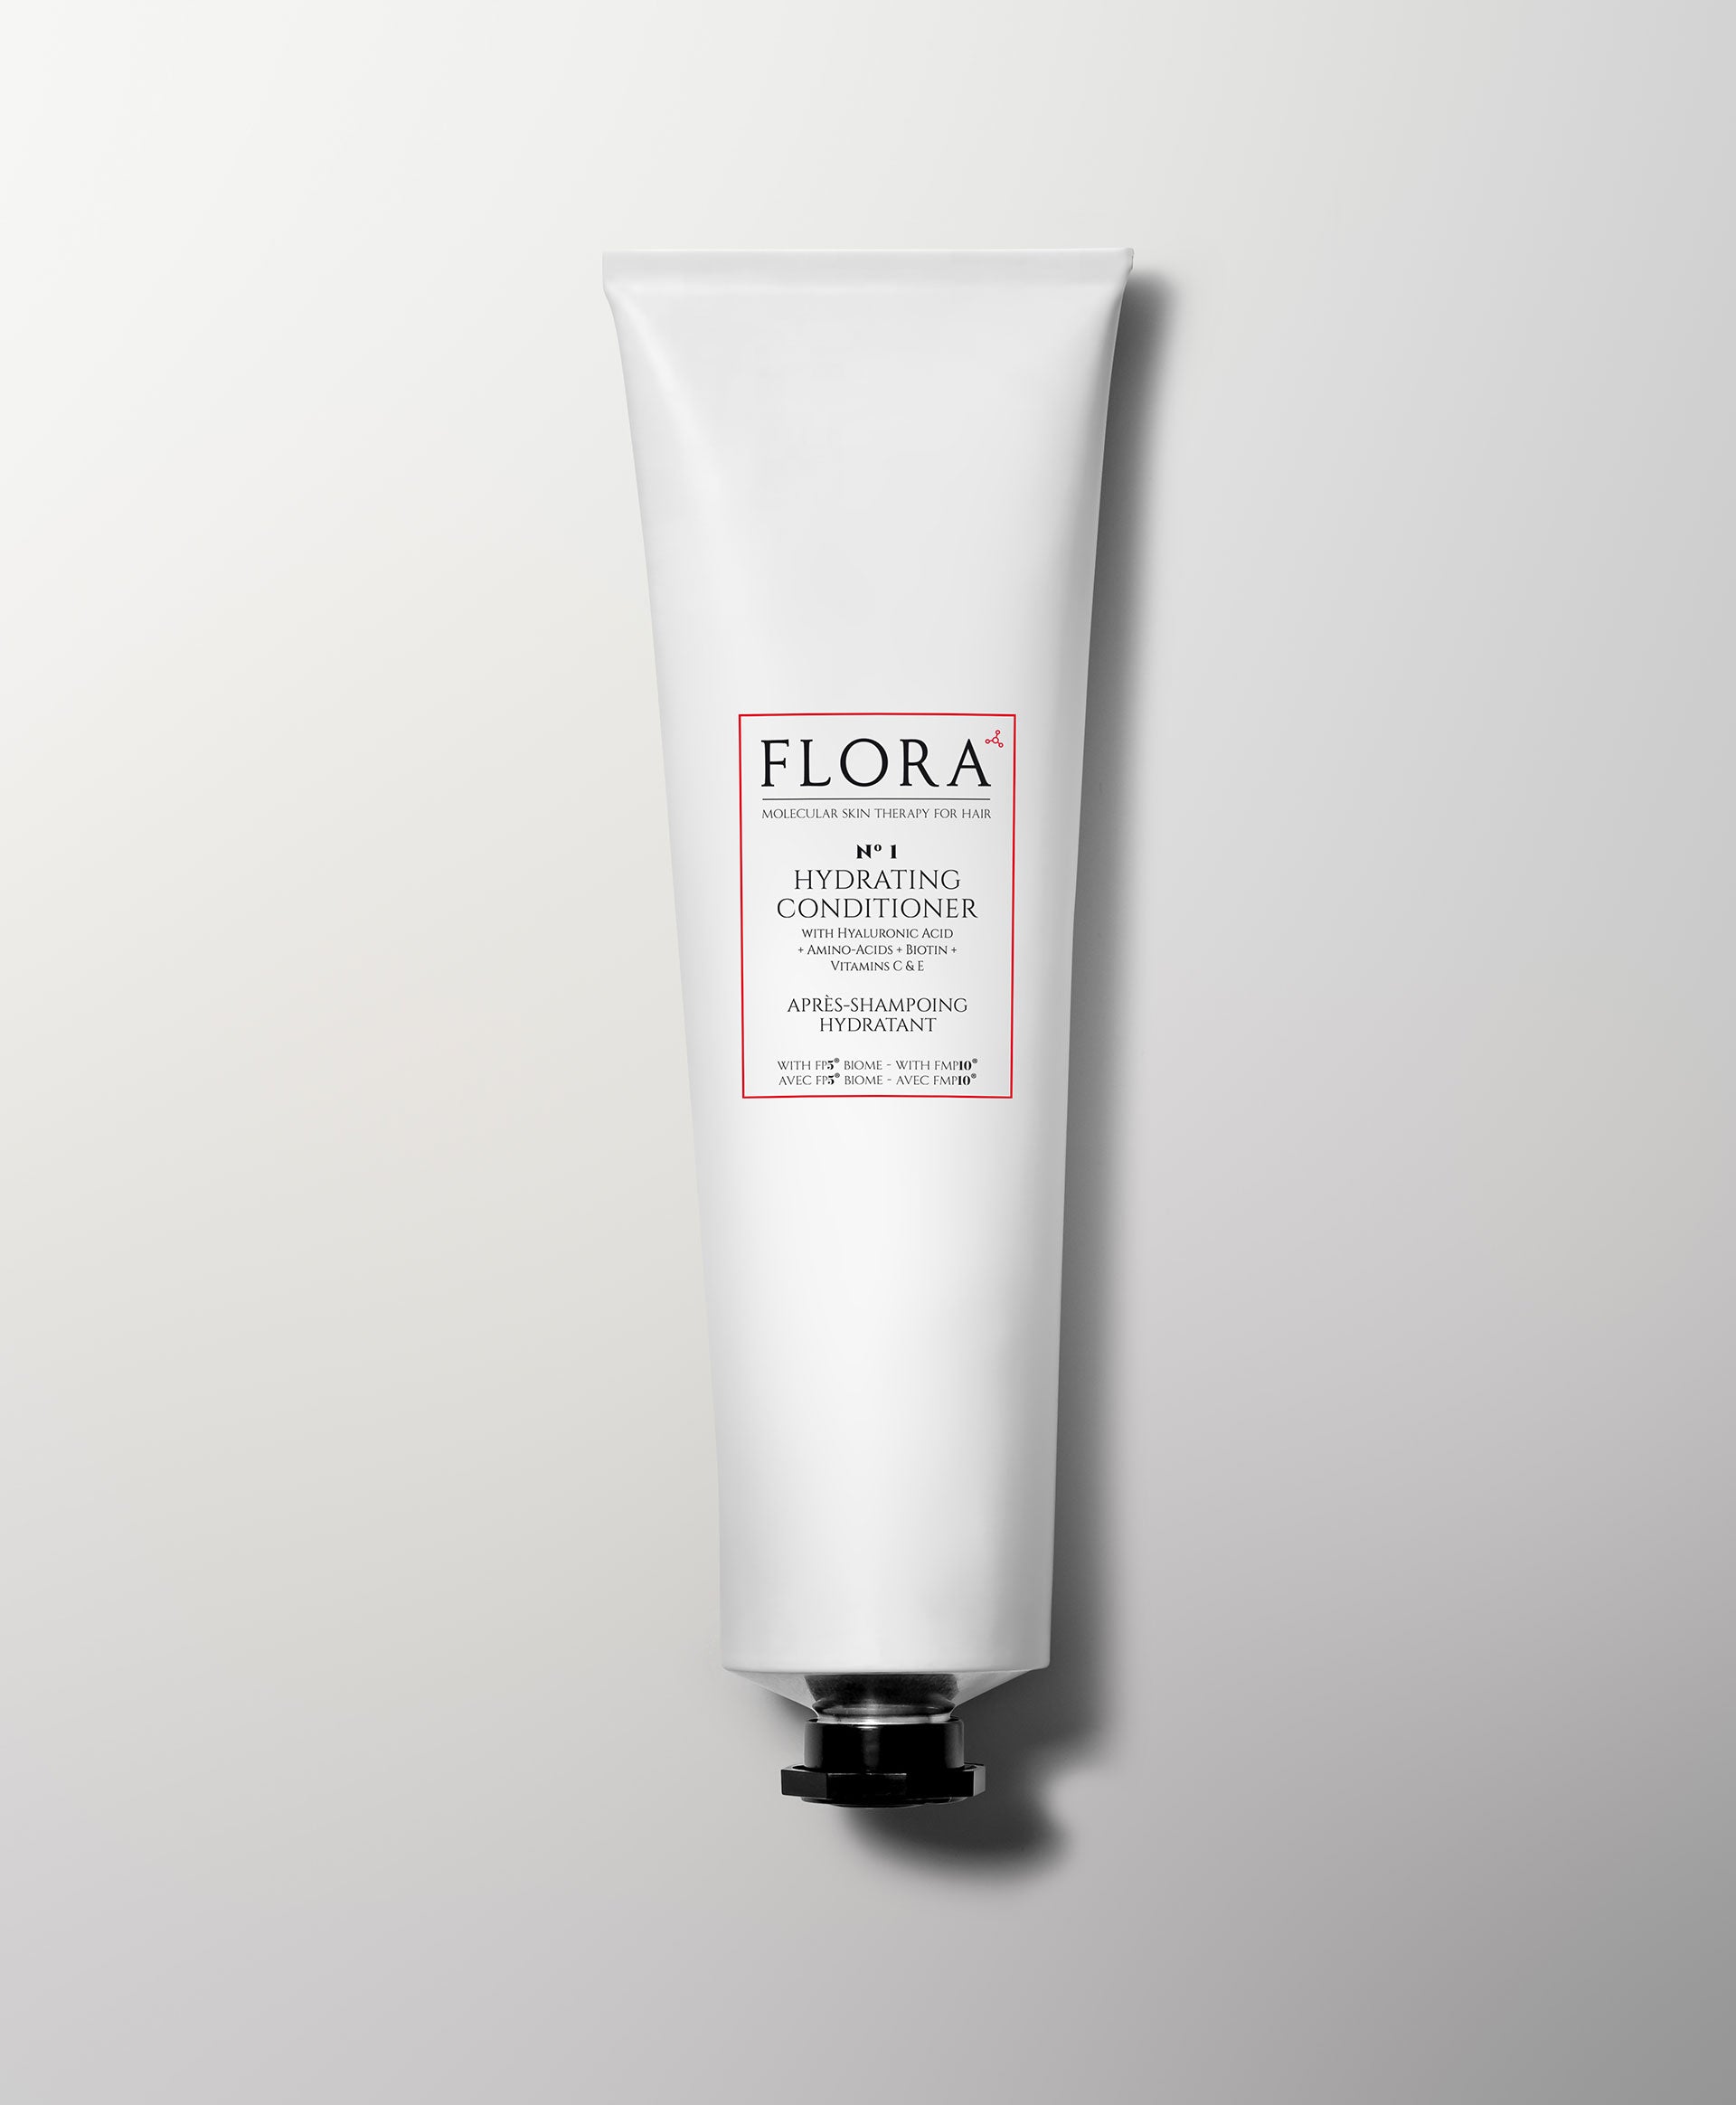 N° 1 Hydrating Conditioner